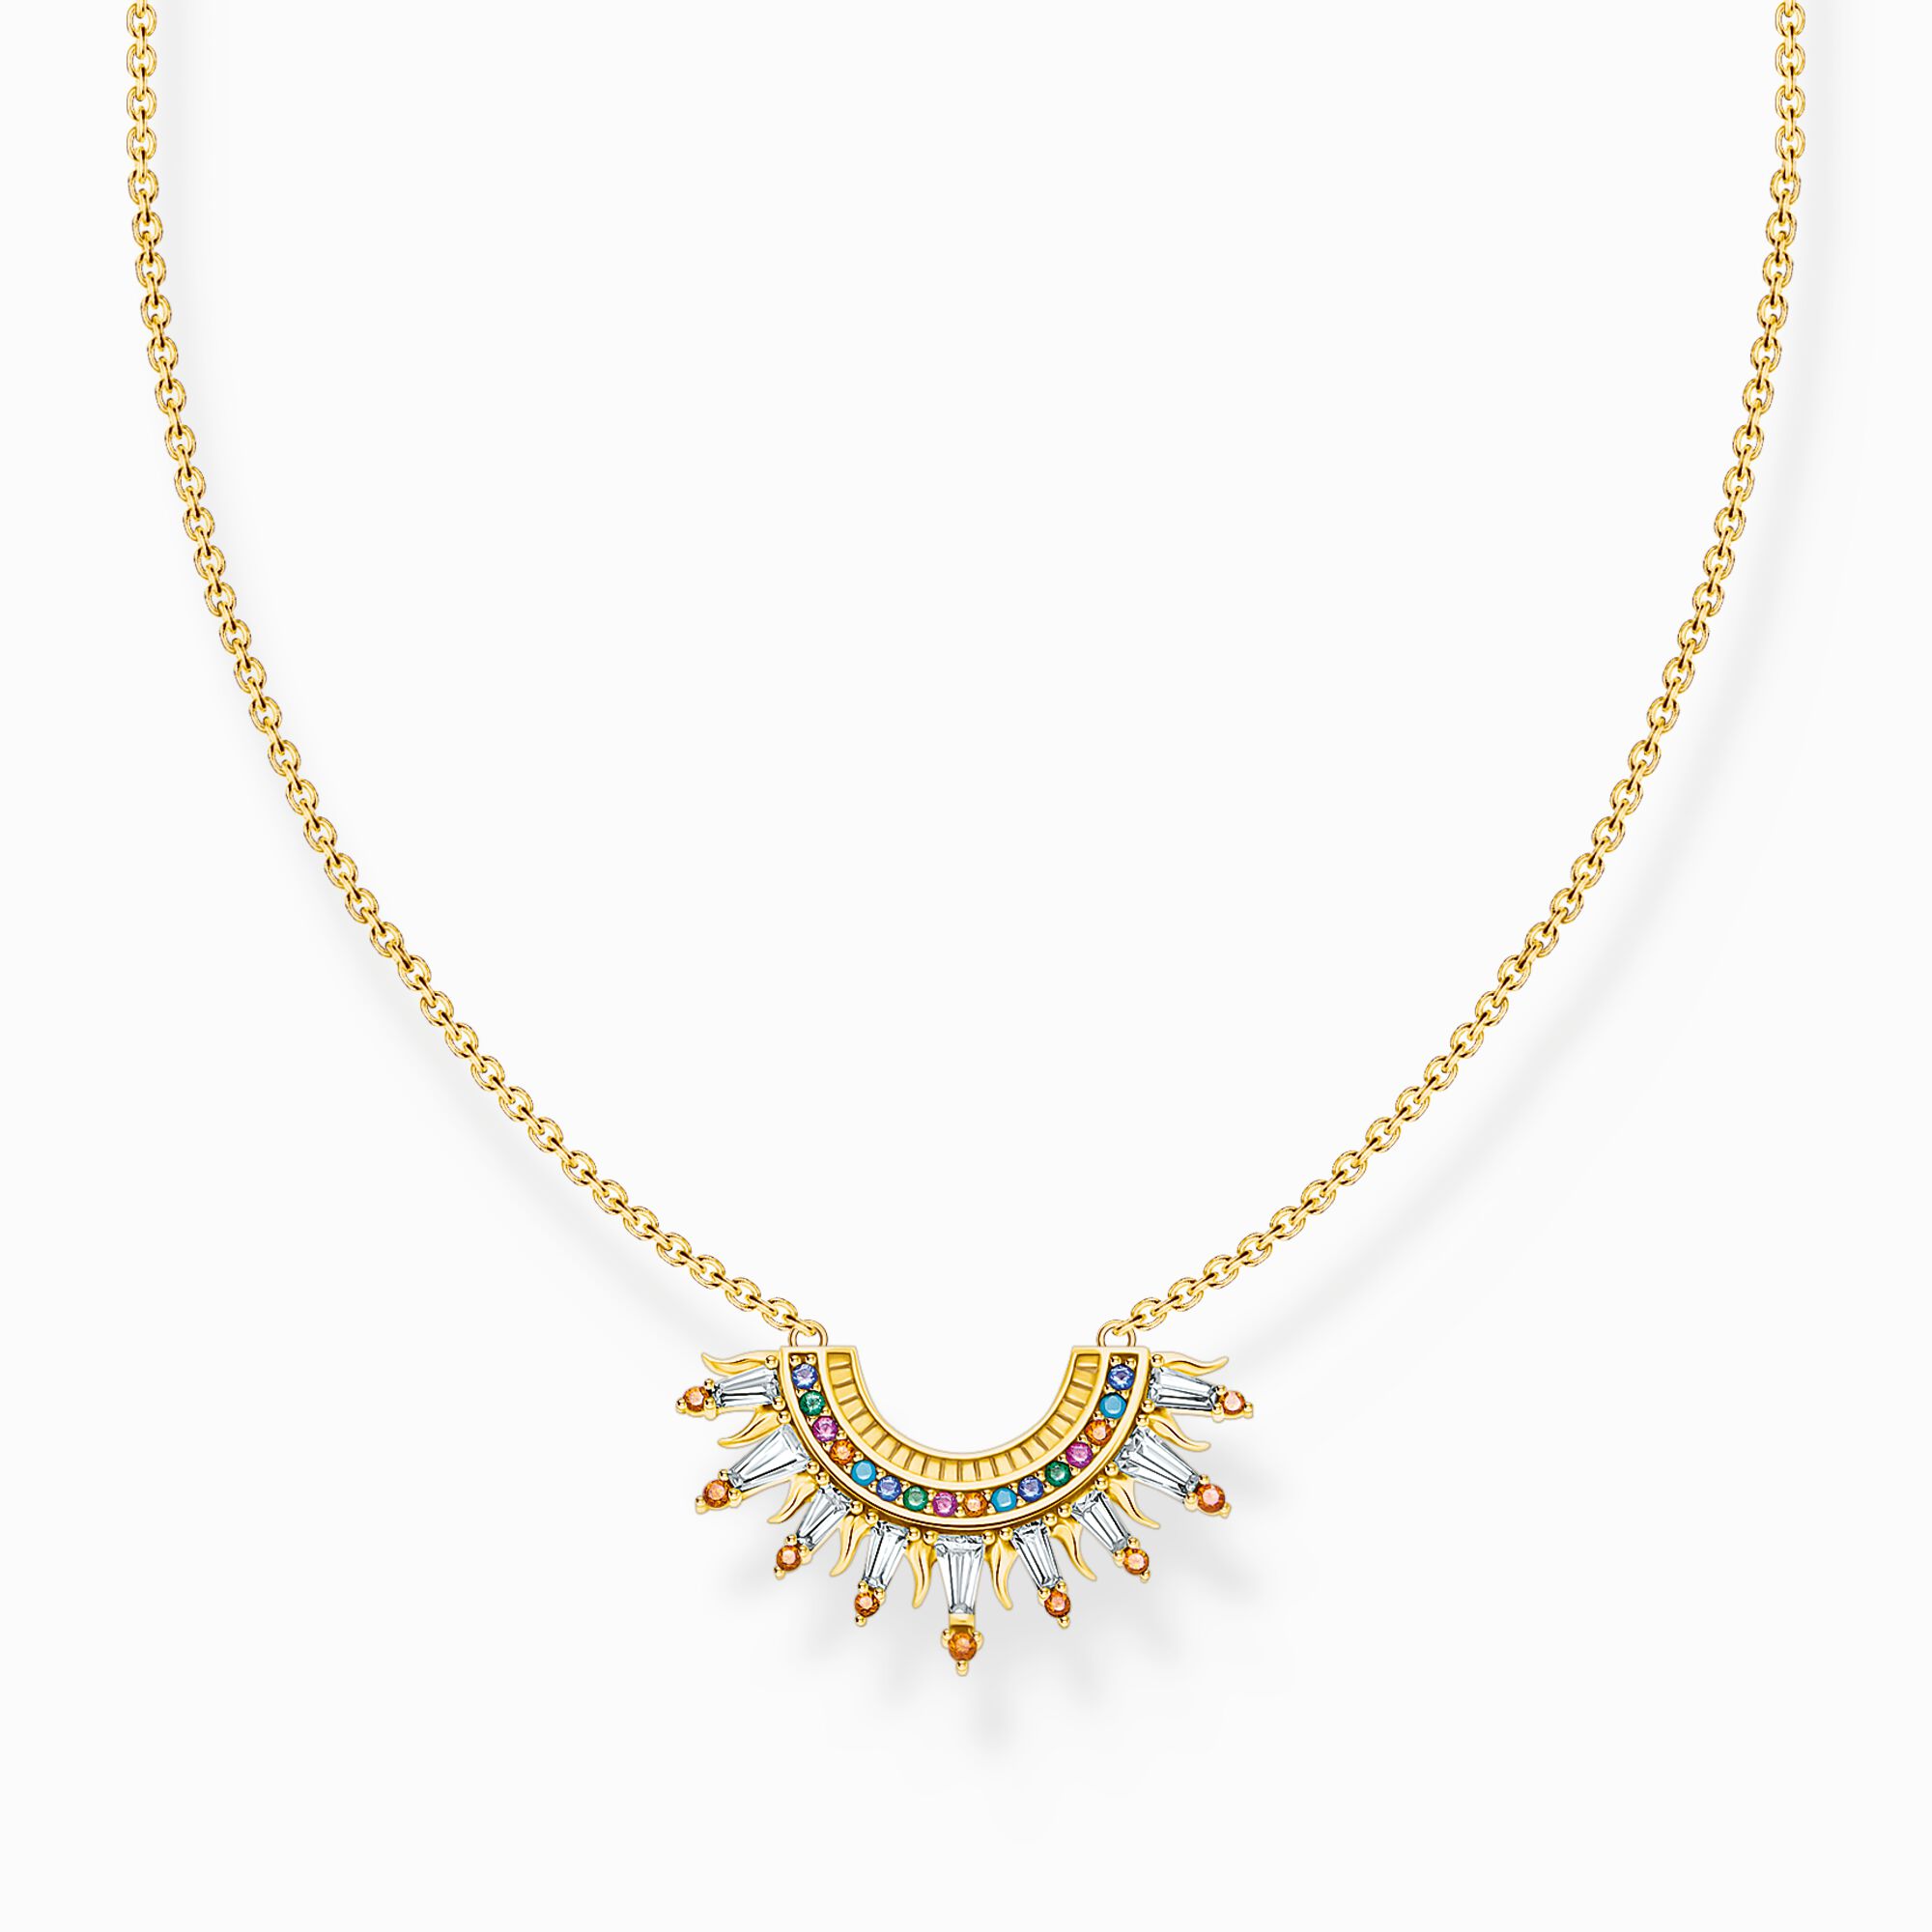 Gold-plated necklace with sun beams and colourful stones from the Charming Collection collection in the THOMAS SABO online store